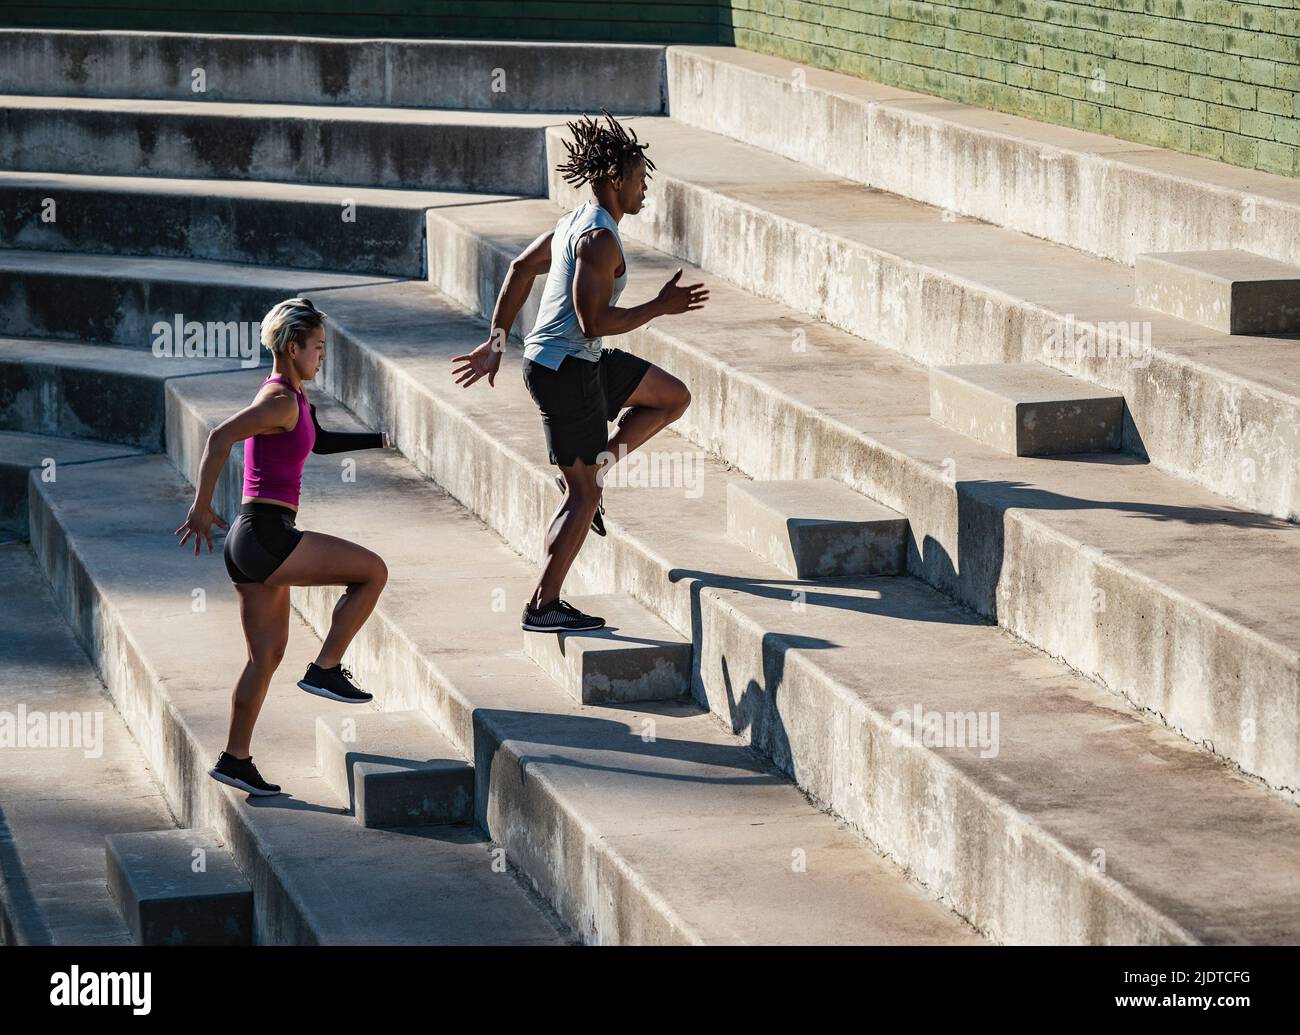 Athletic man and woman with amputated hand running up steps Stock Photo